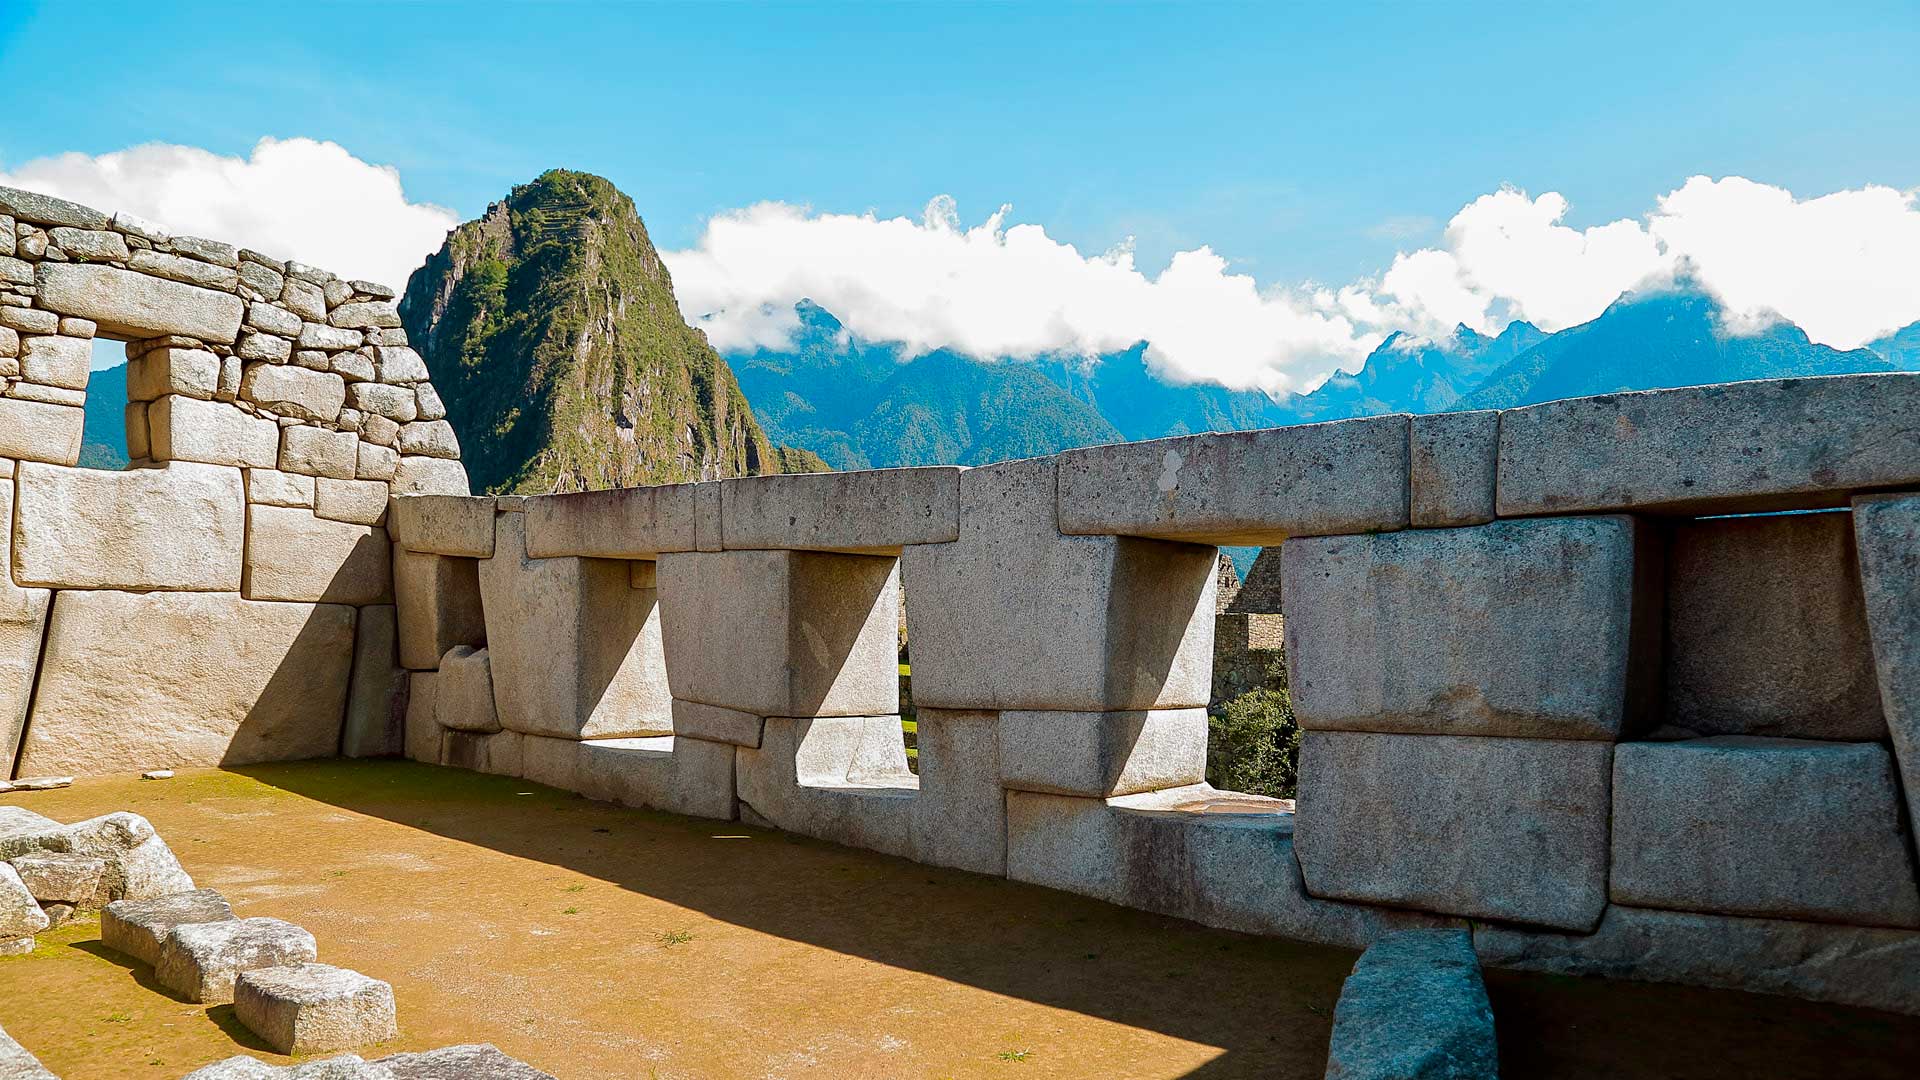 Detailed photo of the impressive Inca constructions in Machu Picchu